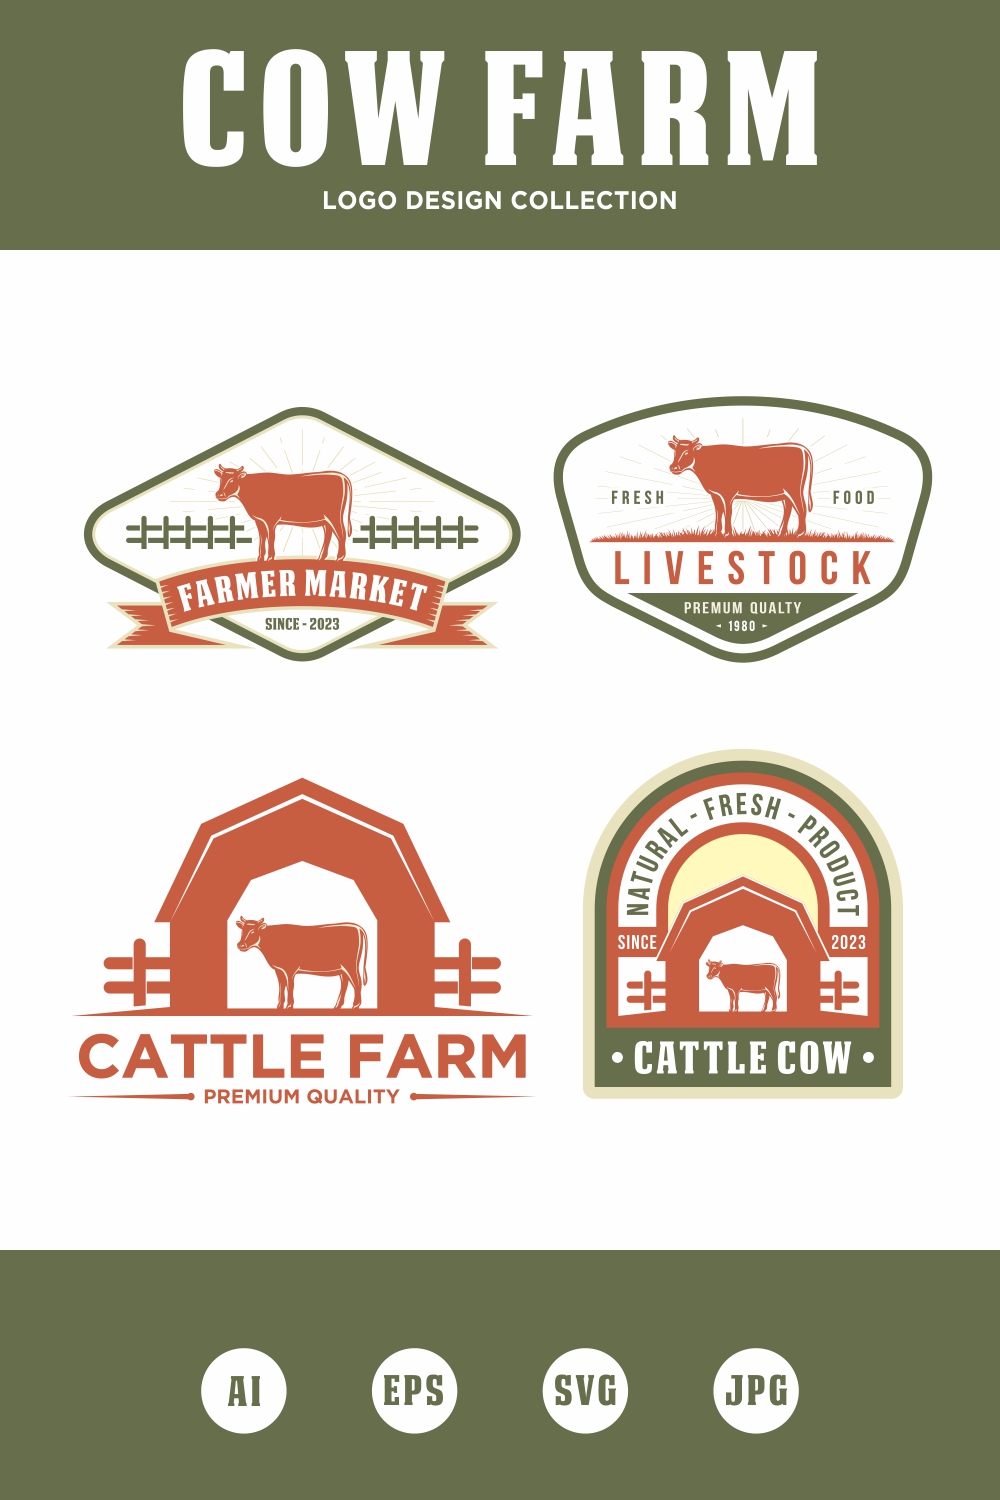 Cattle Farm logo design collection - only 10$ pinterest preview image.